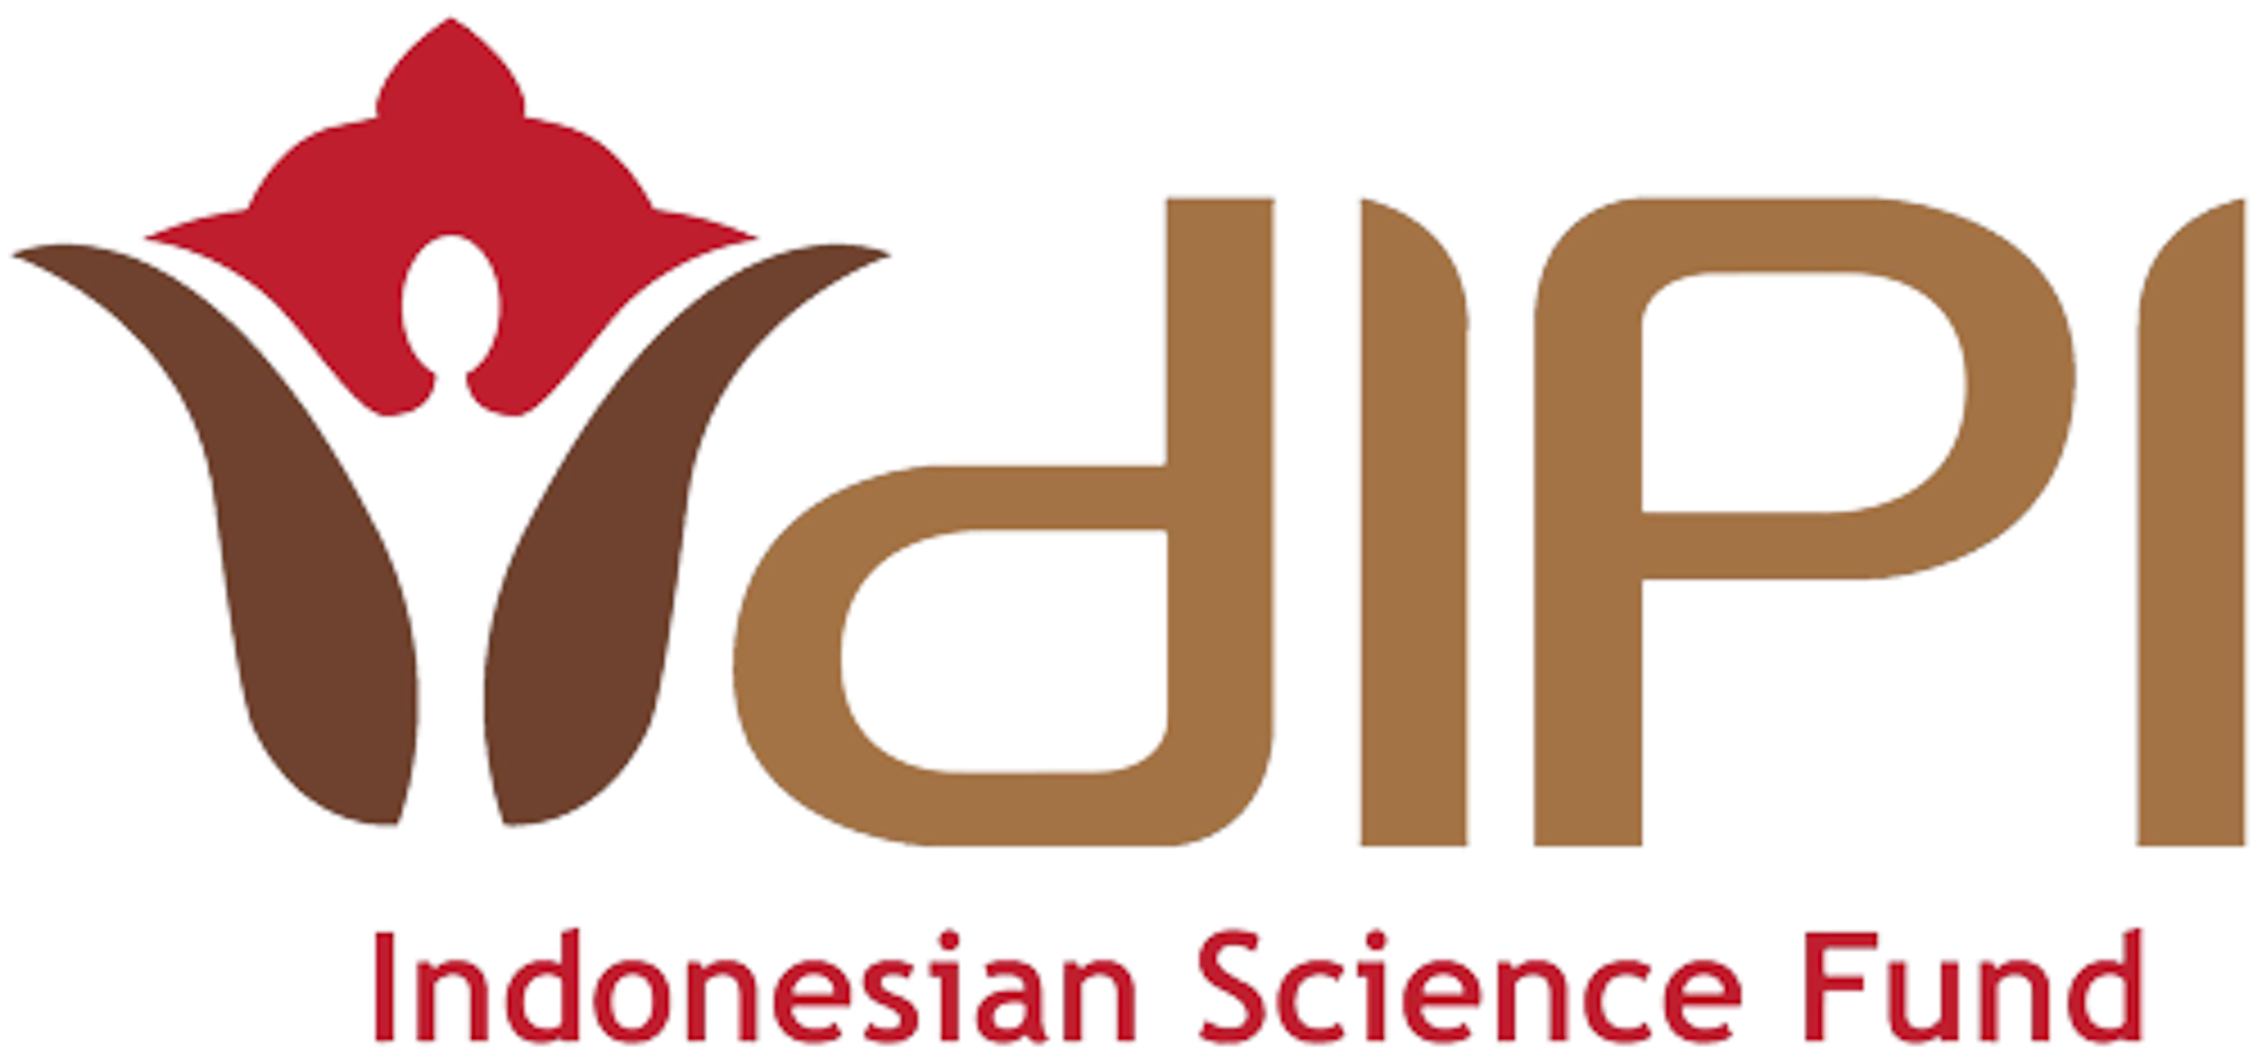 research company indonesia